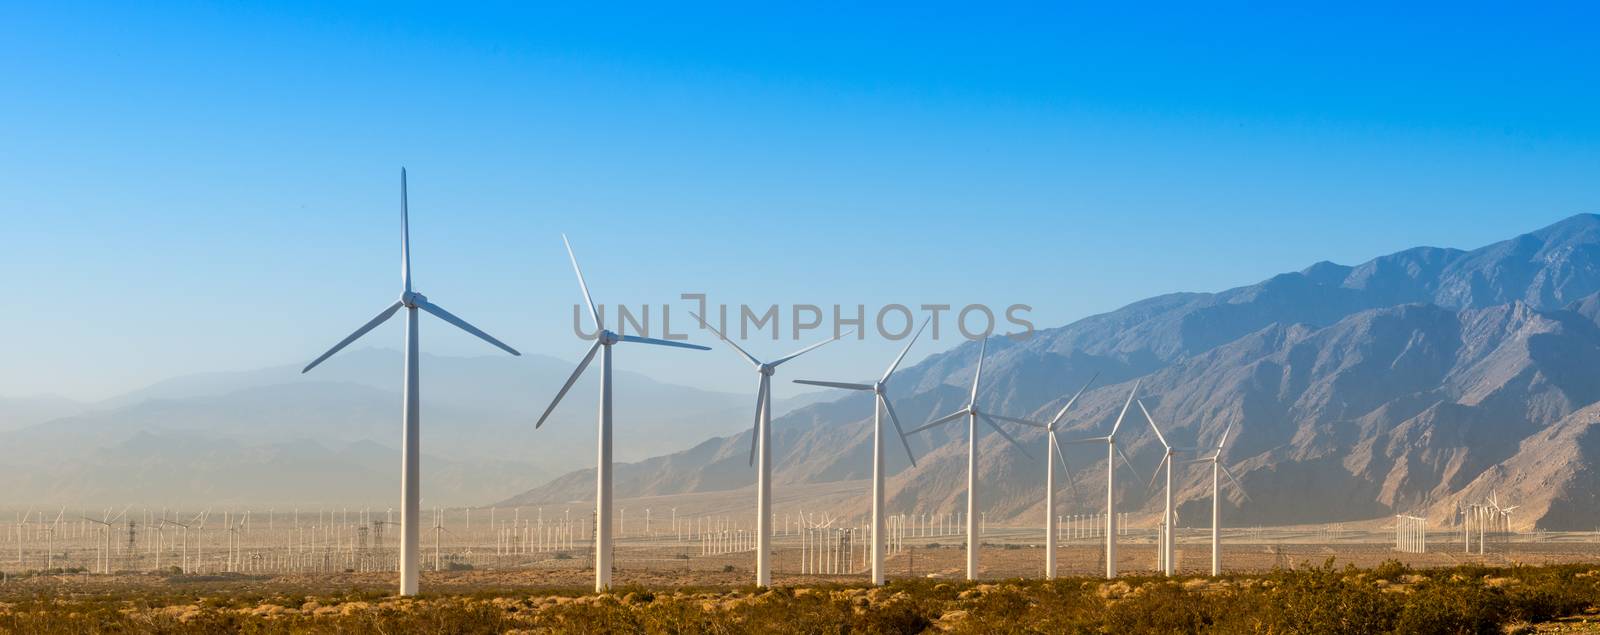 Windmills with Mountains by patrickstock